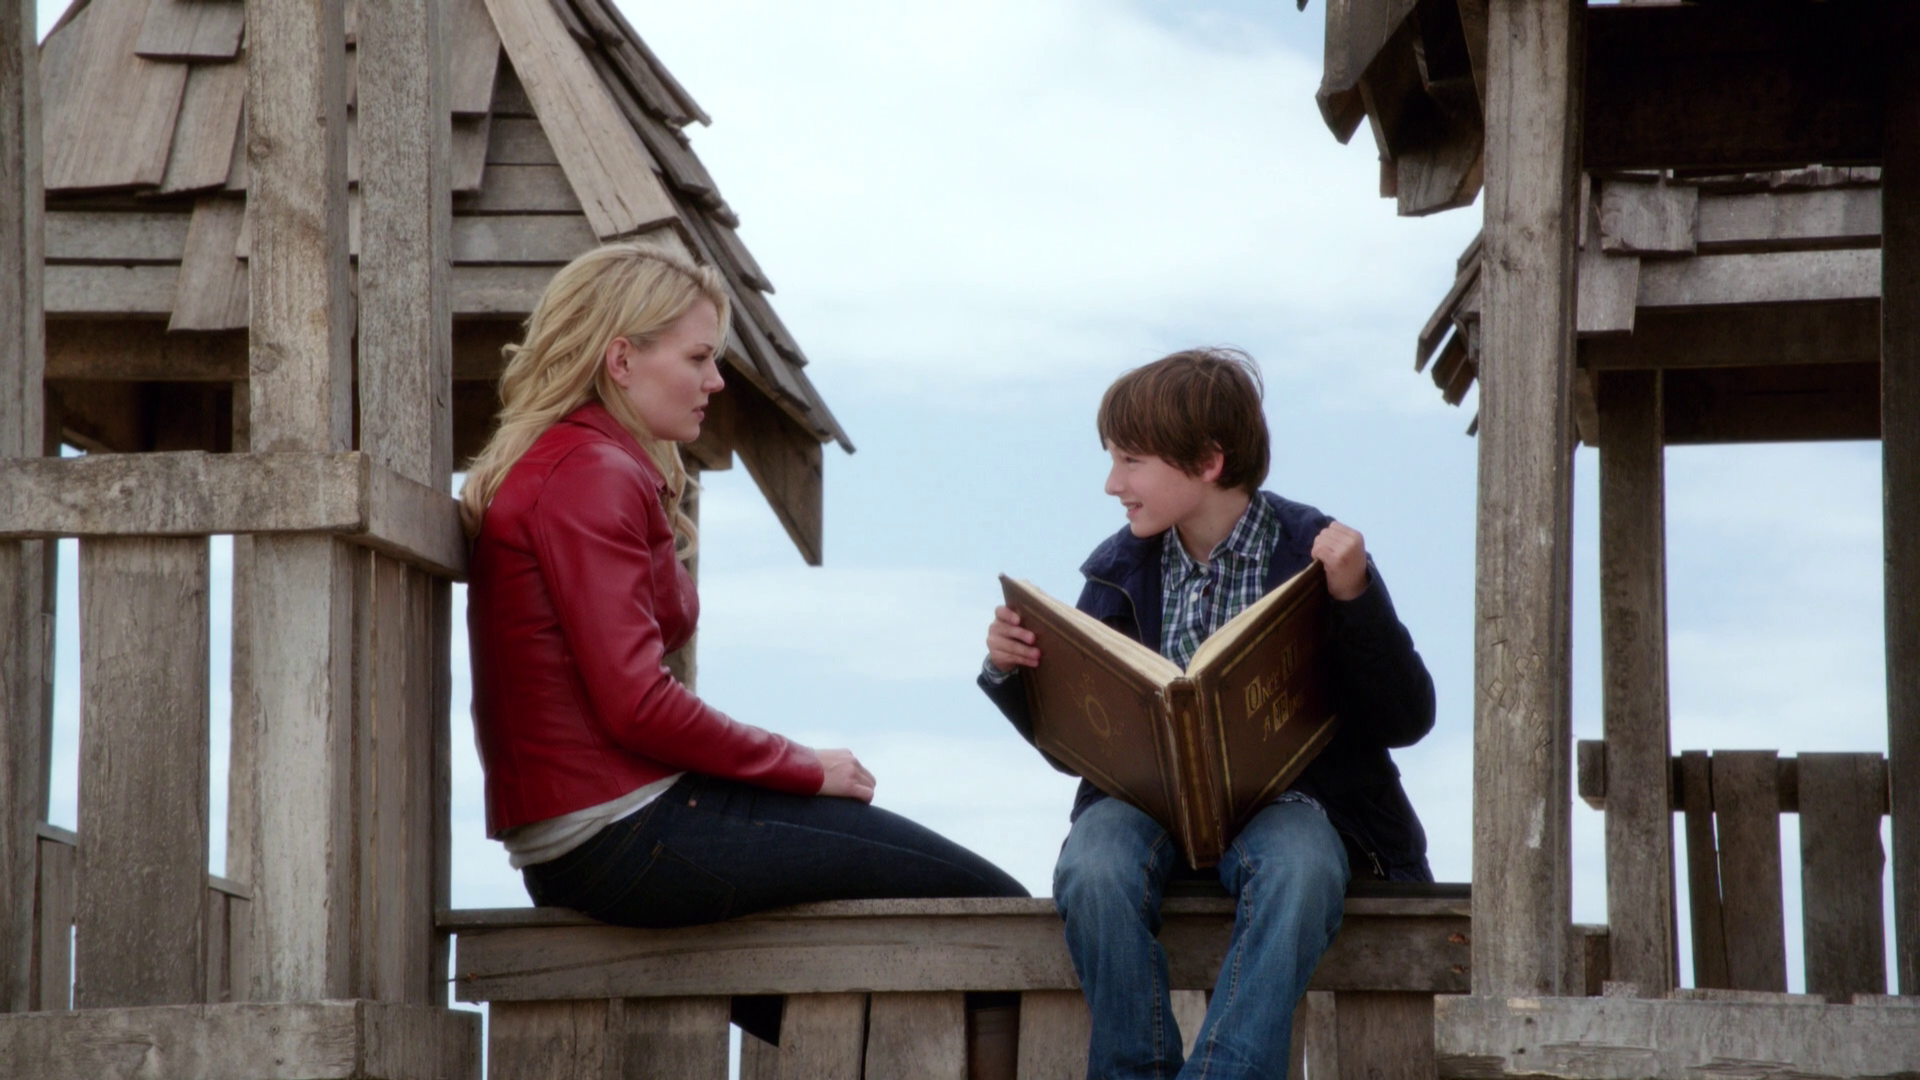 Emma and Henry sit on a play structure while they discuss some of the fairytales in Henry's book, "Once Upon a Time."